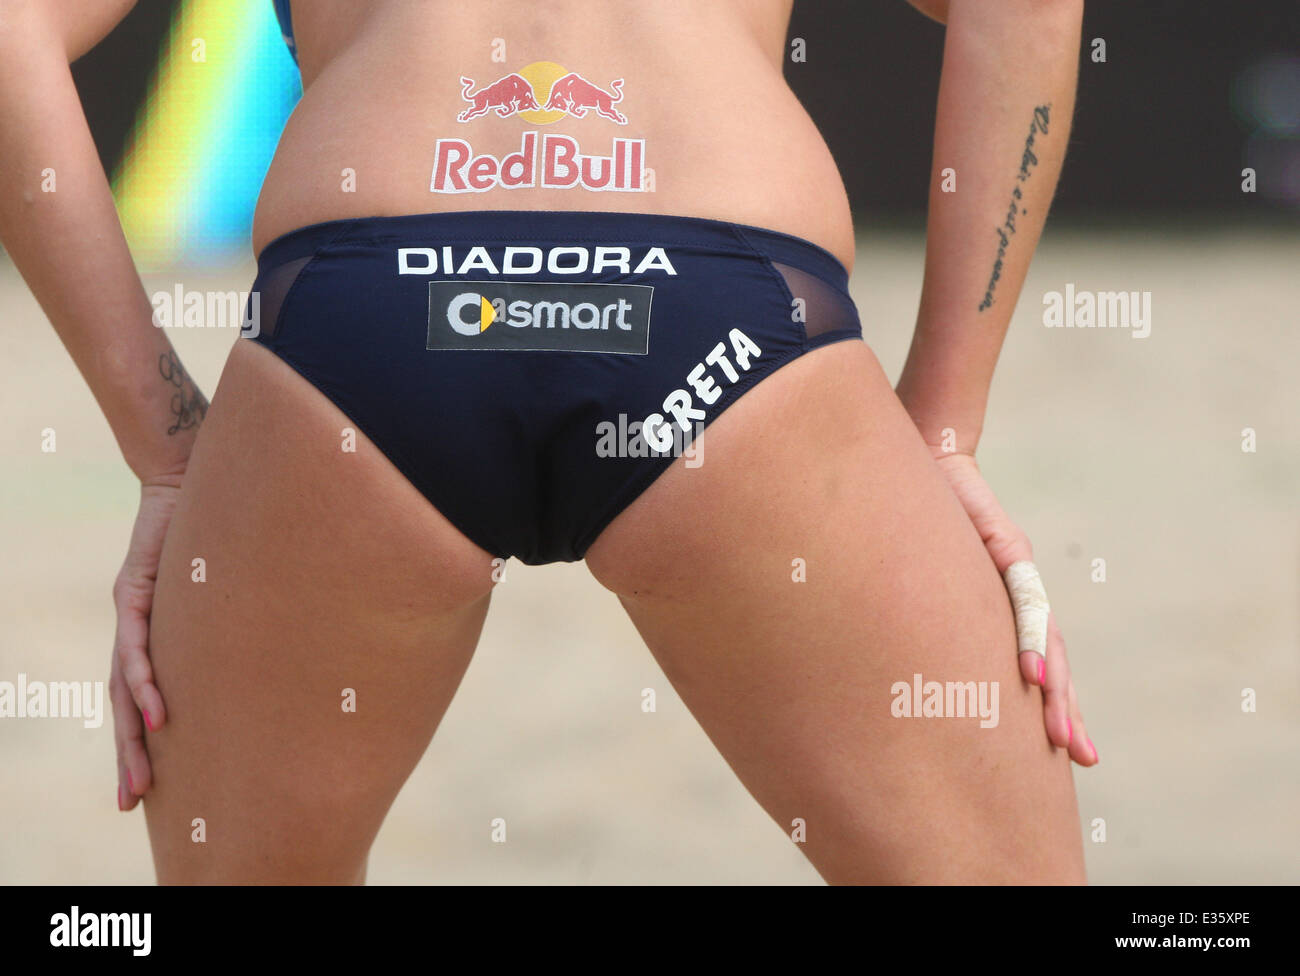 BEACH BUMS ARE VOLLEYBALL COOL Beach Volleyball Bikini Bottom Boost. . . .  Contestants at the recent FIVB Beach Volleyball World Championships in  Poland have received backing following criticism that showing sponsorship